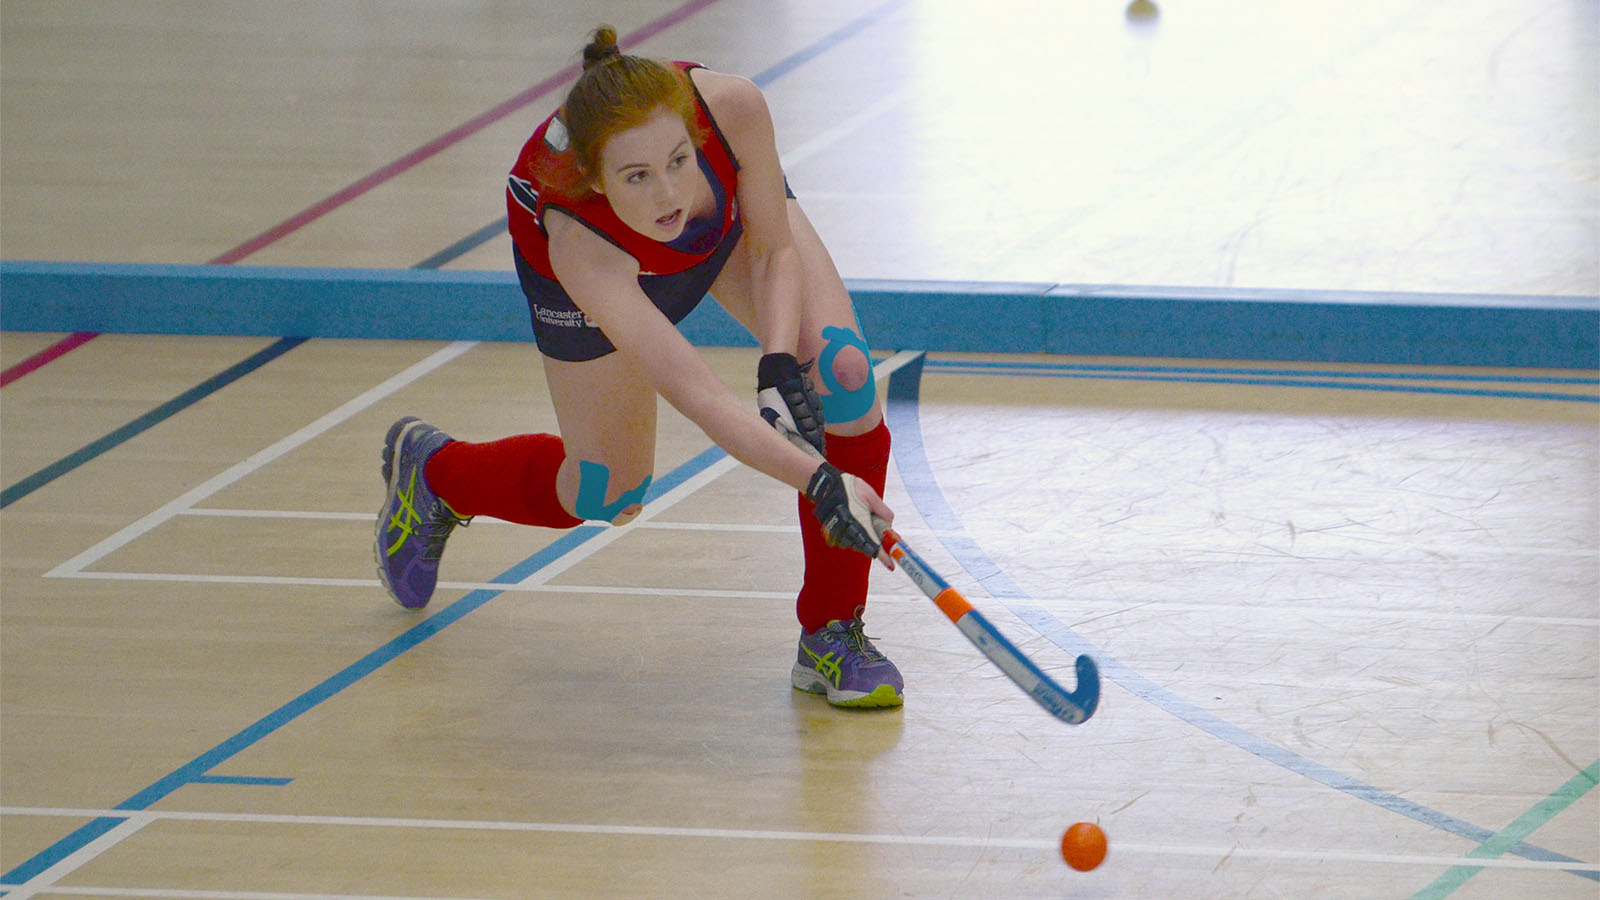 A female hockey player takes a swing at the ball on an indoor court.